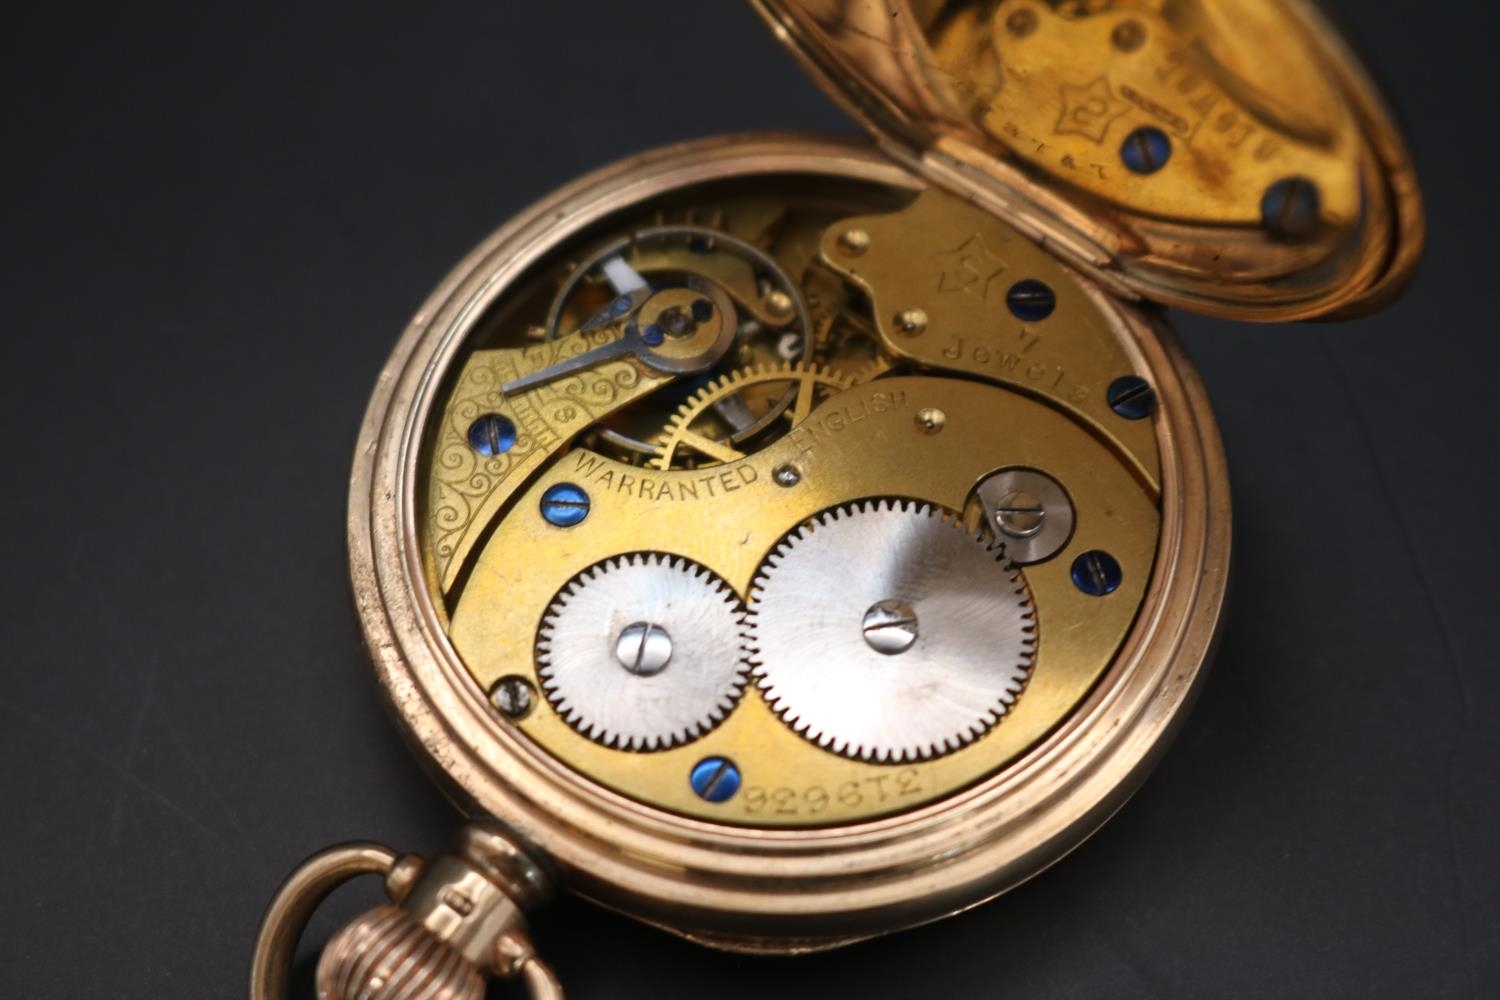 To The Admiralty by Sanders & Co Ltd Kensington, W. 9ct Gold Pocket watch with roman numeral Dial - Image 2 of 2